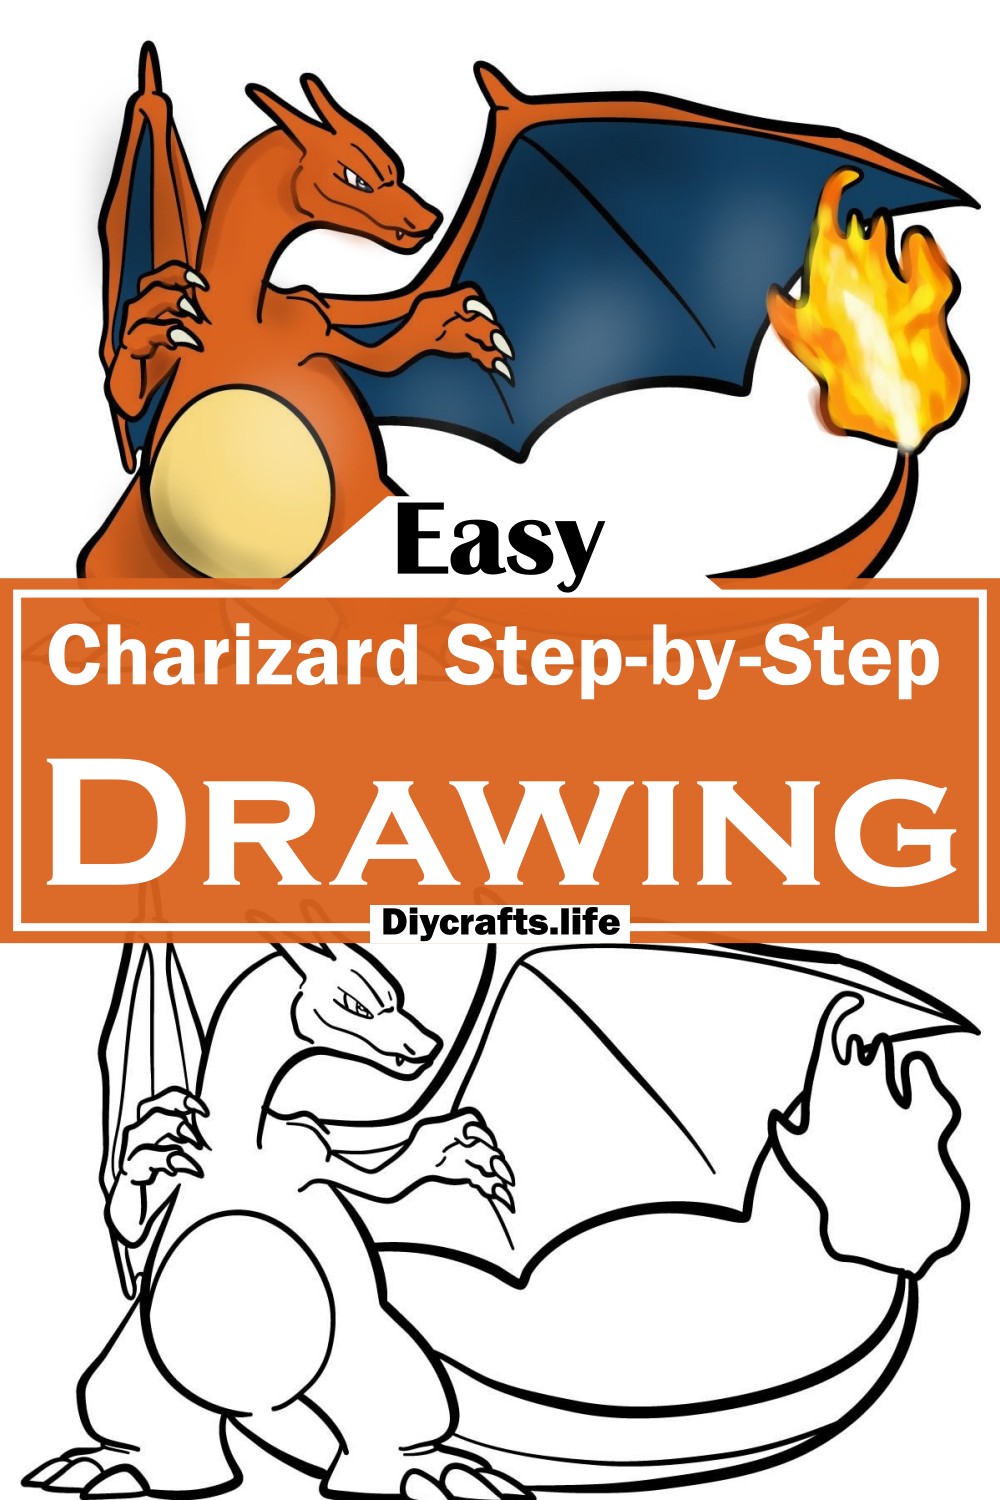 Charizard Step-by-Step Drawing